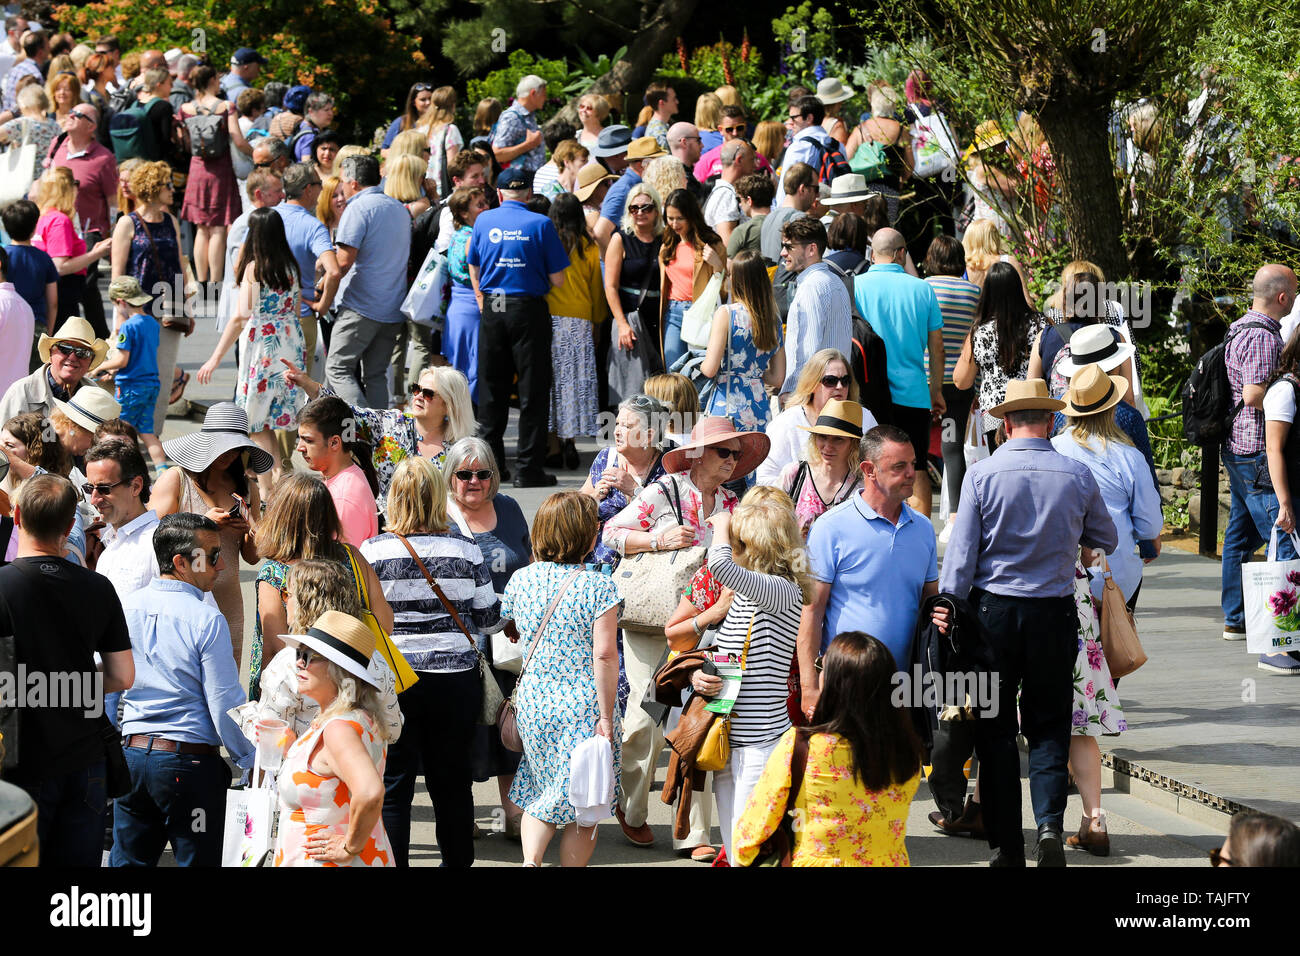 London, UK. 26th May 2019. Large crowd of visitors at the RHS Chelsea Flower Show on the final day of the show. The Royal Horticultural Society Chelsea Flower Show is an annual garden show held in the grounds of the Royal Hospital Chelsea in West London since 1913.  Credit: Dinendra Haria/Alamy Live News Stock Photo